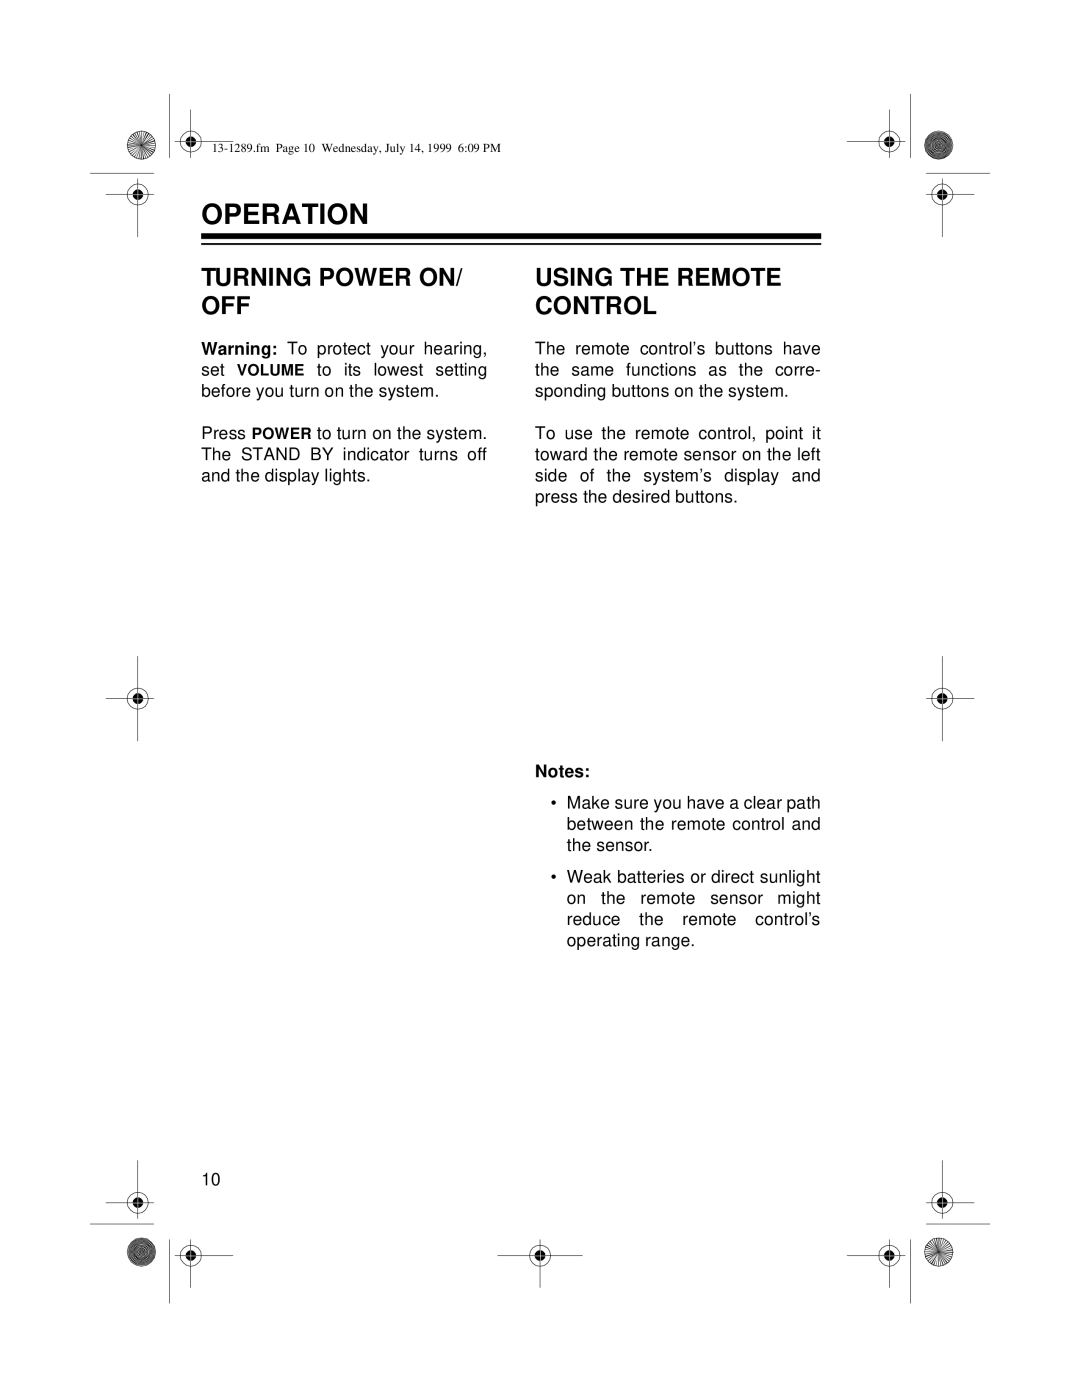 Optimus 742 owner manual Operation, Turning Power On/ Off, Using The Remote Control 